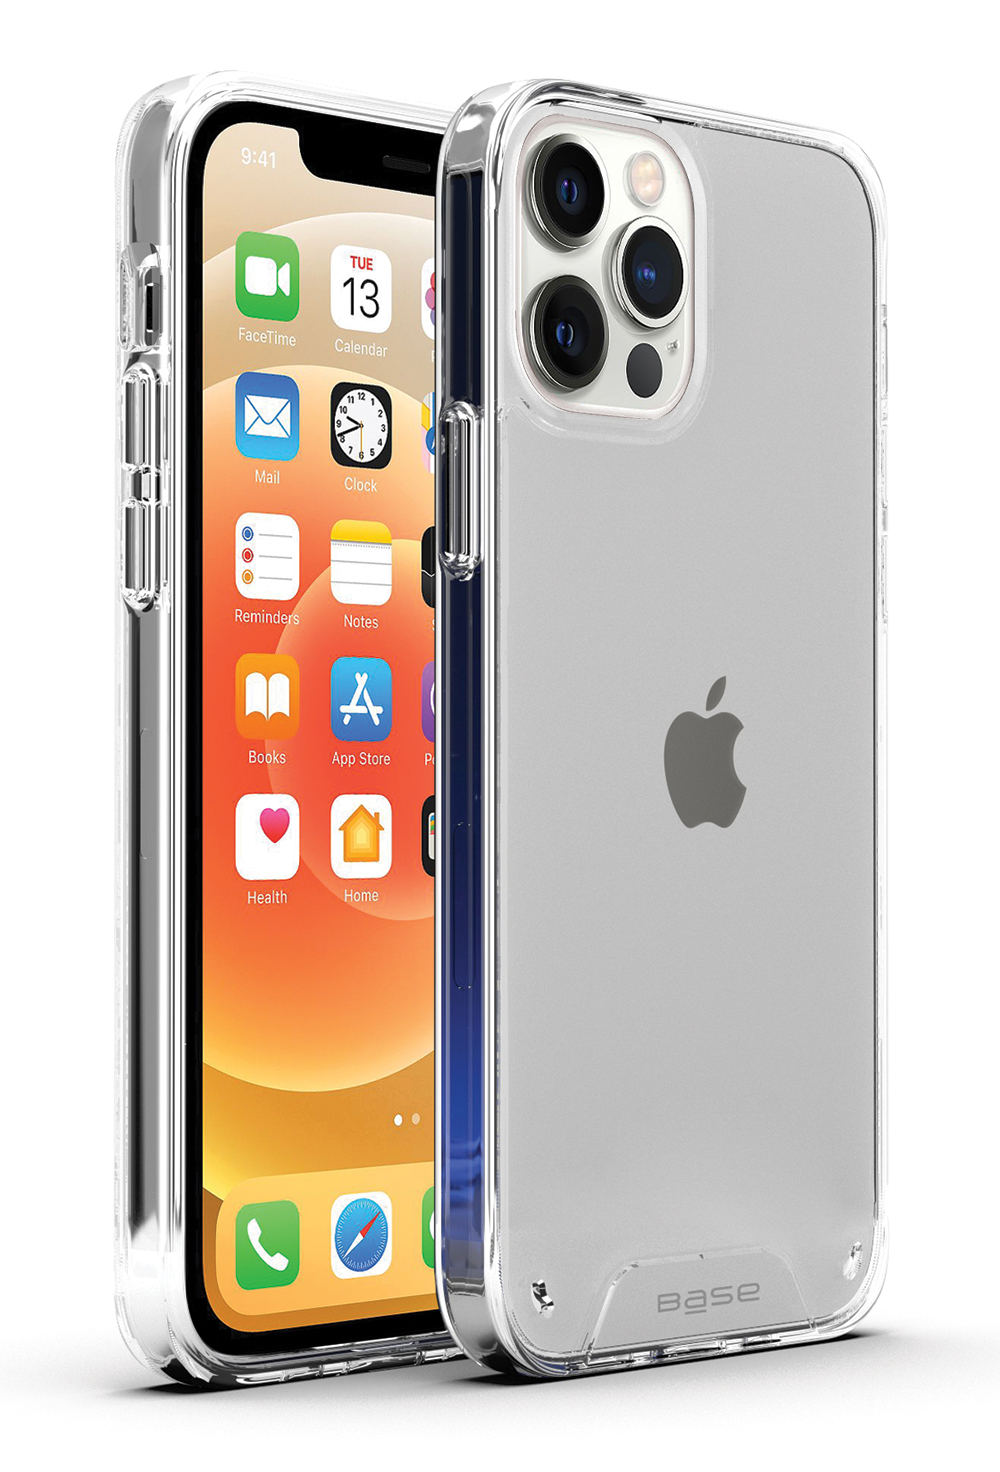 Crystal clear slim case protector for iPhone 12 / iPhone 12 Pro cell phones